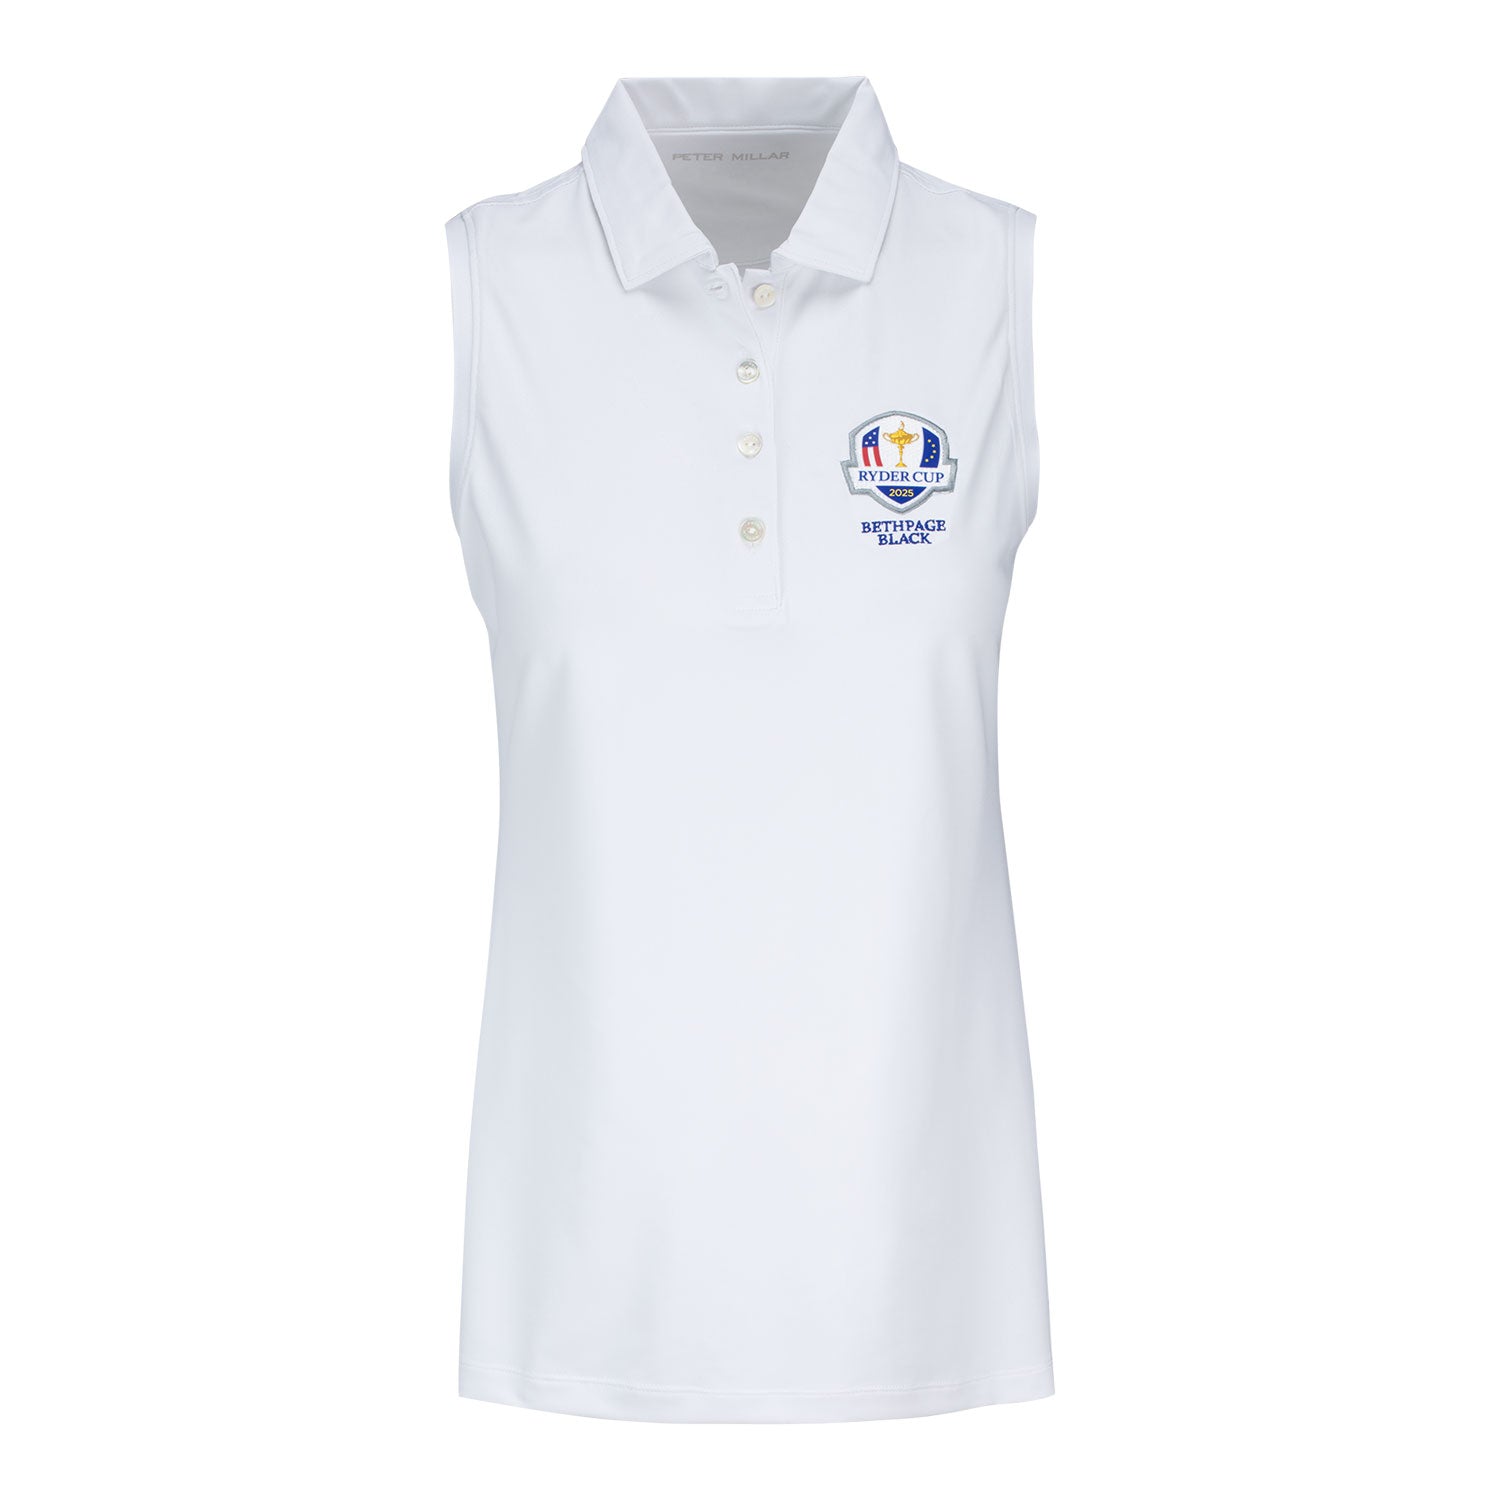 Peter Millar 2025 Ryder Cup Women's Sleeveless Polo in White - Front View